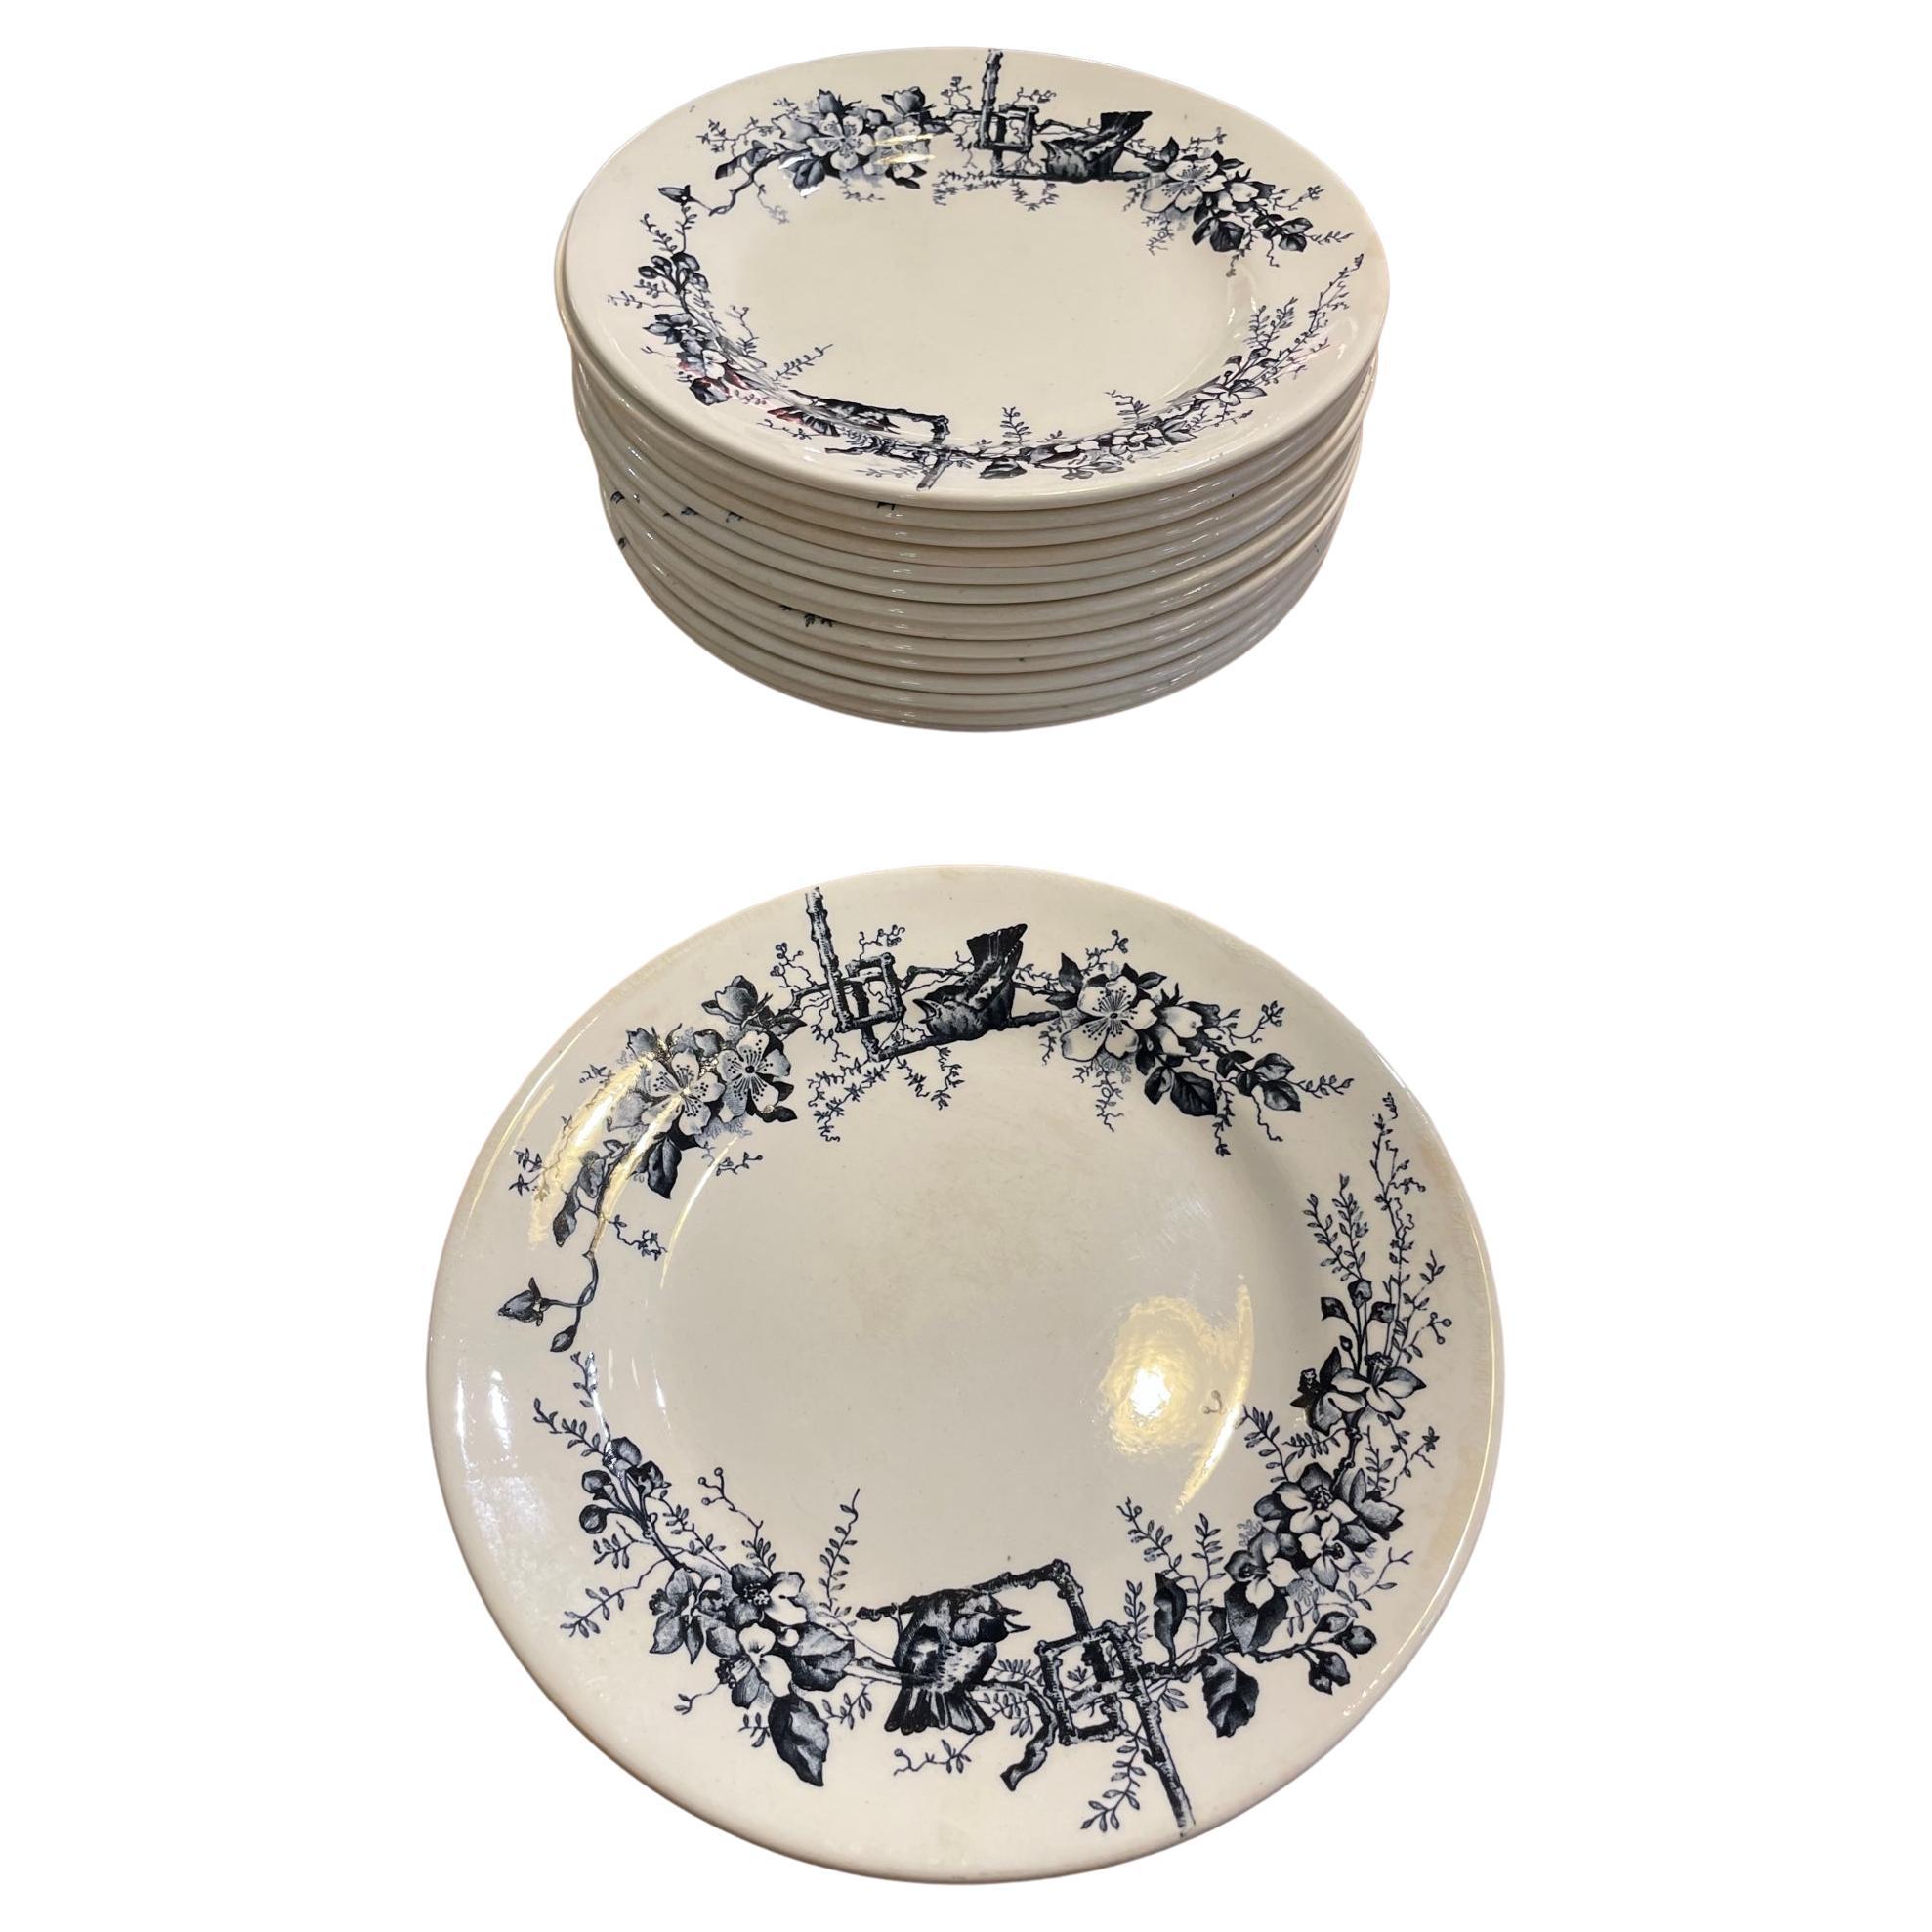 Beautiful French Faience Plates ''Terre de Fer" with Birds Decor, Set of 15